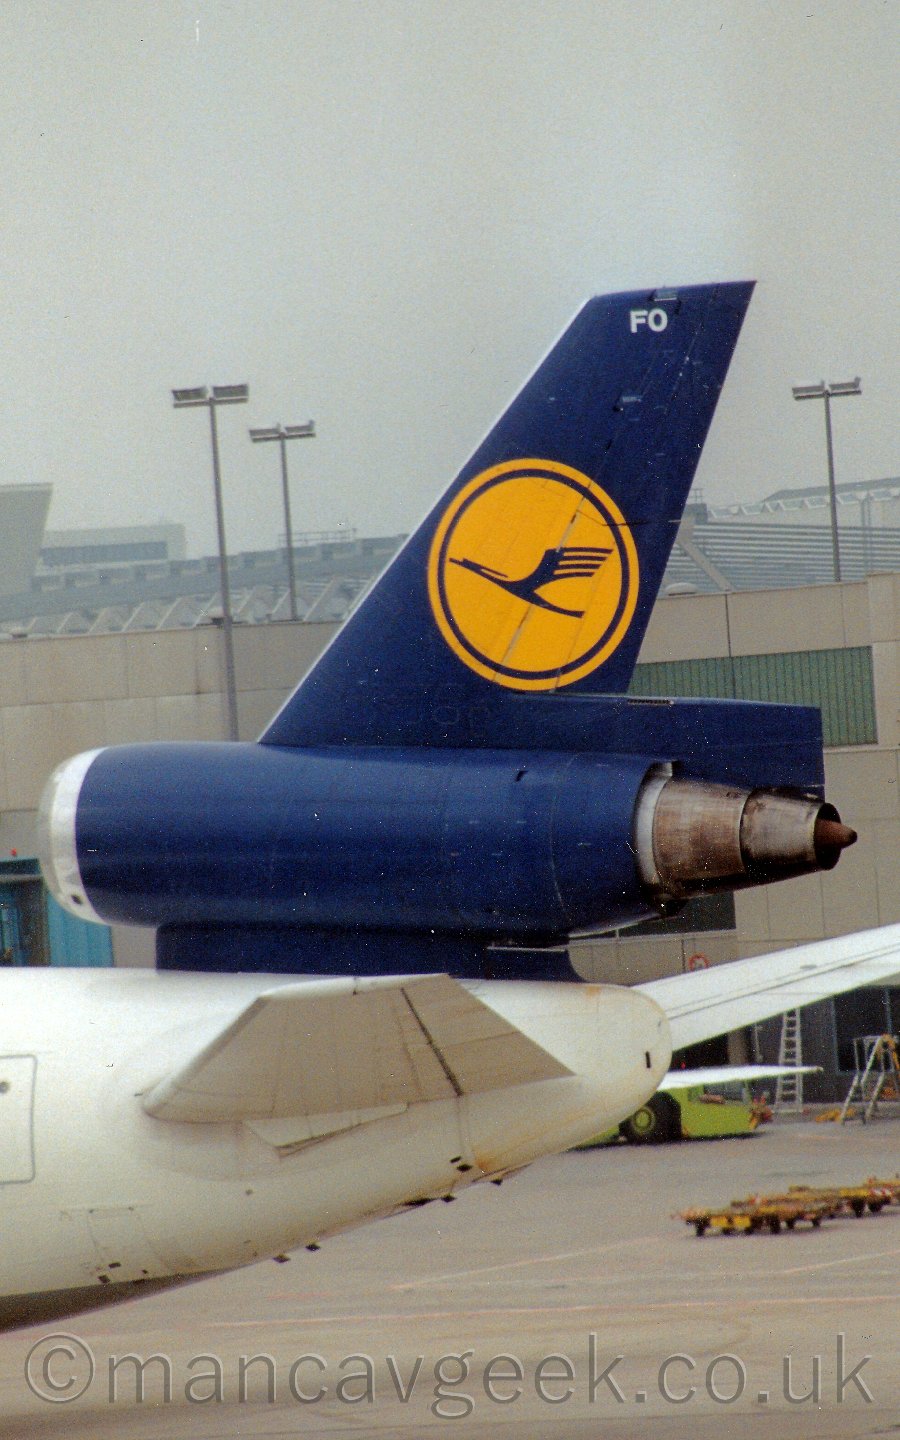 Closeup of the blue and yellow tail and centre engine of a white, 3 engined jet airliner parked facing to the left, with airport buildings in the background, under a dismal grey sky.